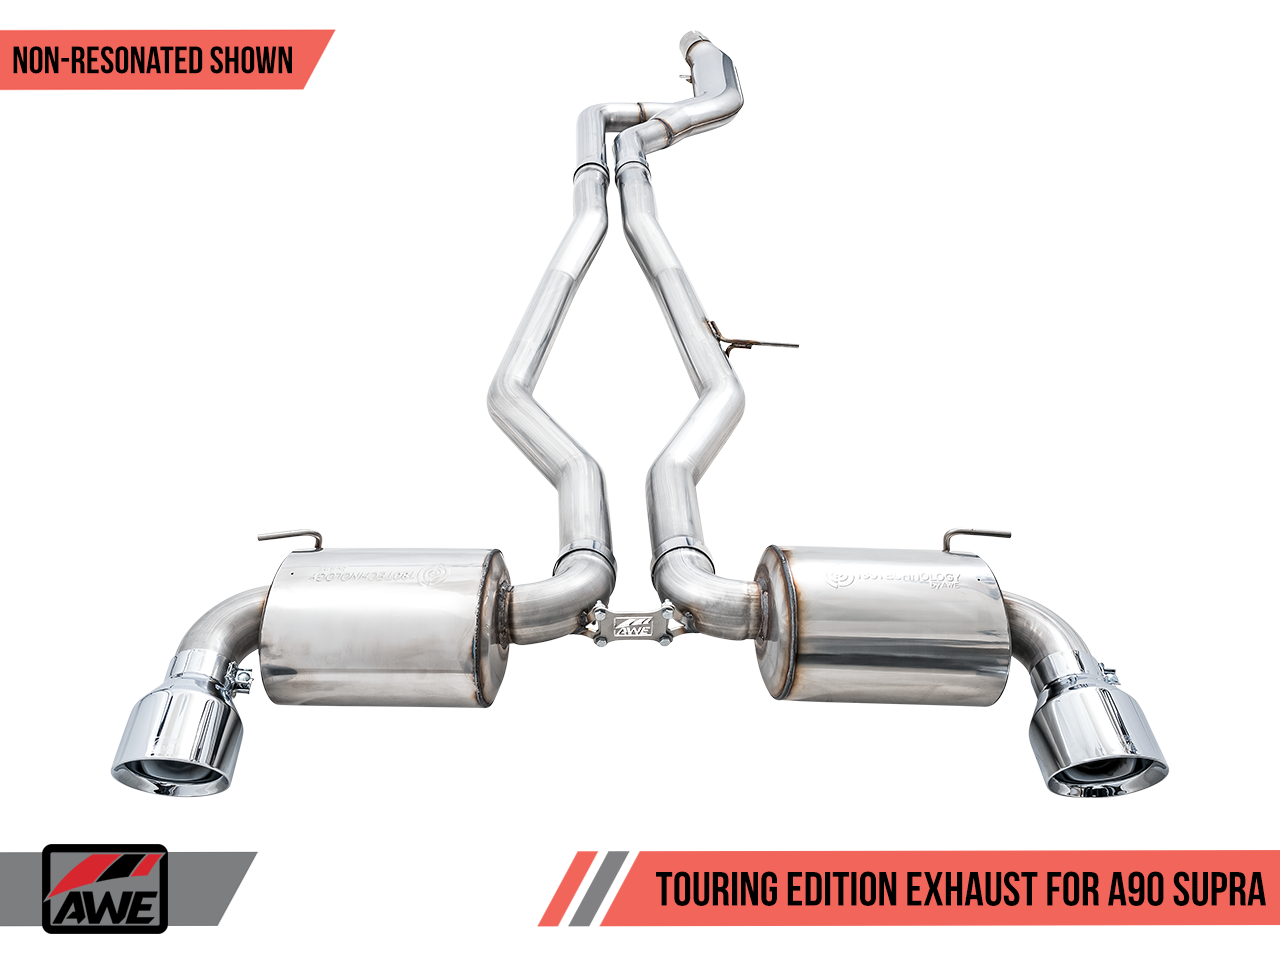 AWE Exhaust Suite Toyota GR Supra